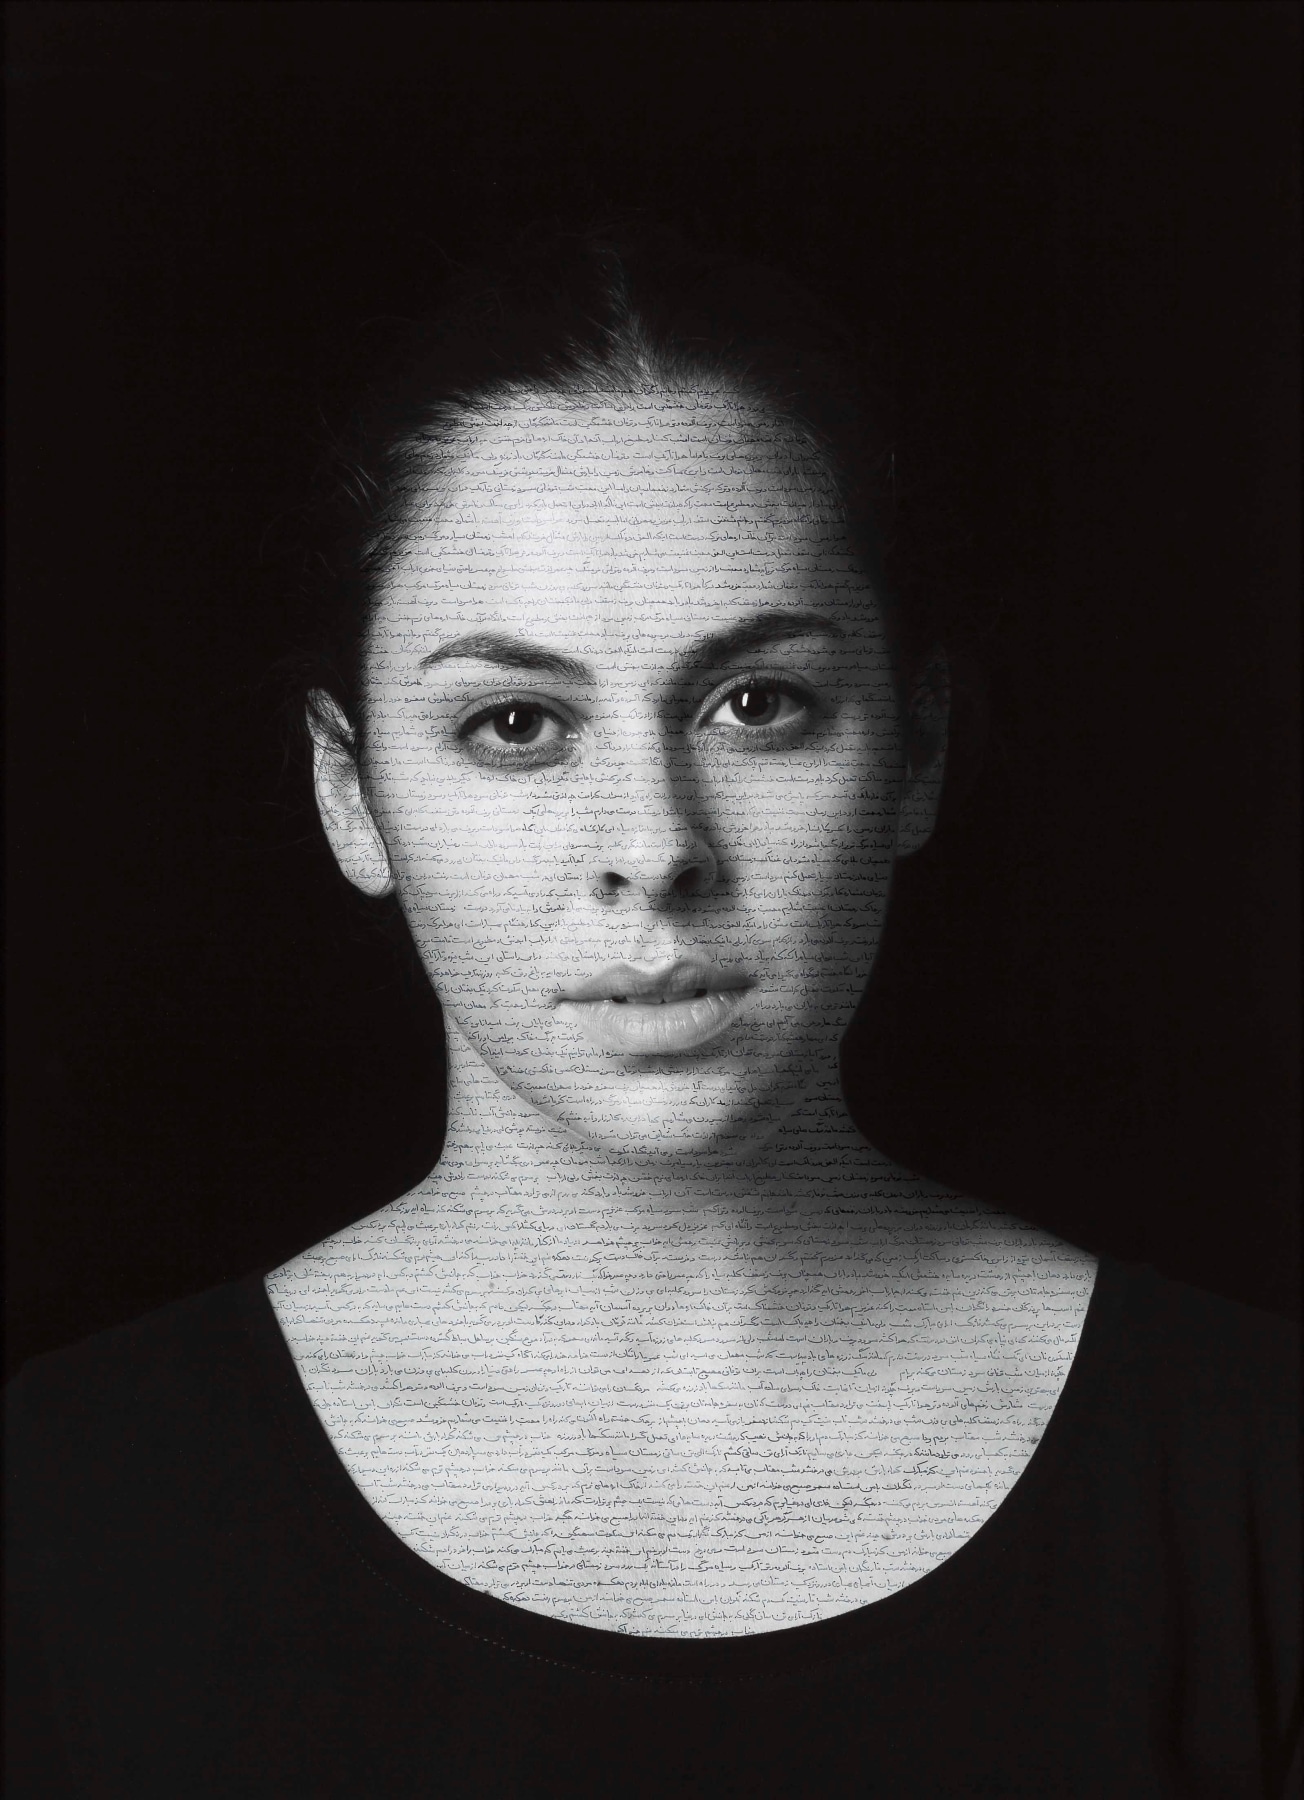 Shirin Neshat, Leah (Masses), from The Book of Kings series, 2012